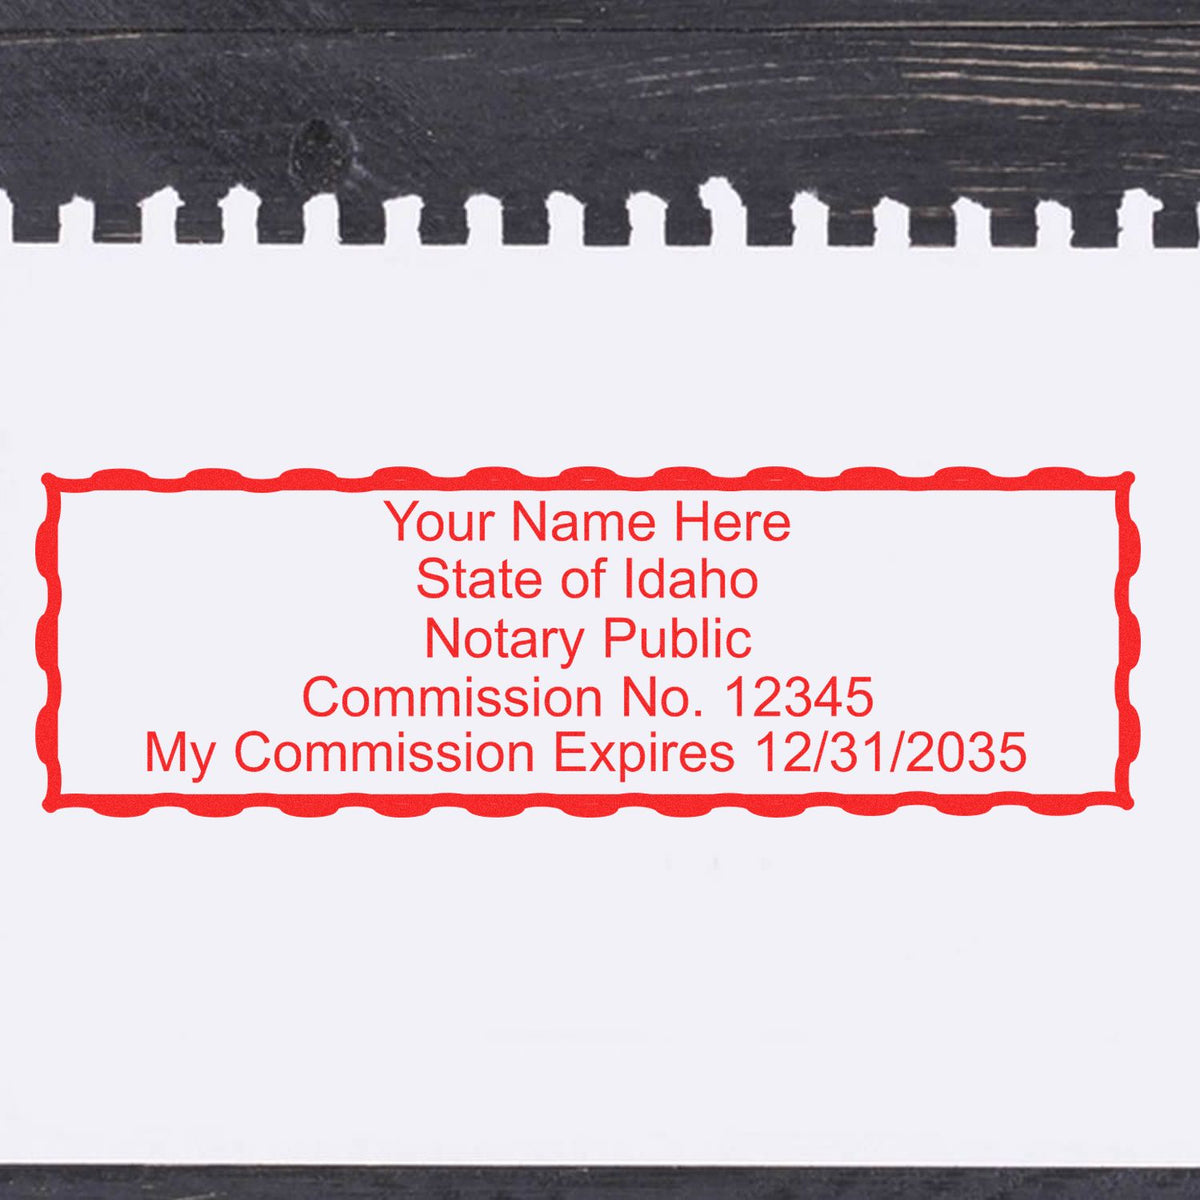 A stamped impression of the PSI Idaho Notary Stamp in this stylish lifestyle photo, setting the tone for a unique and personalized product.